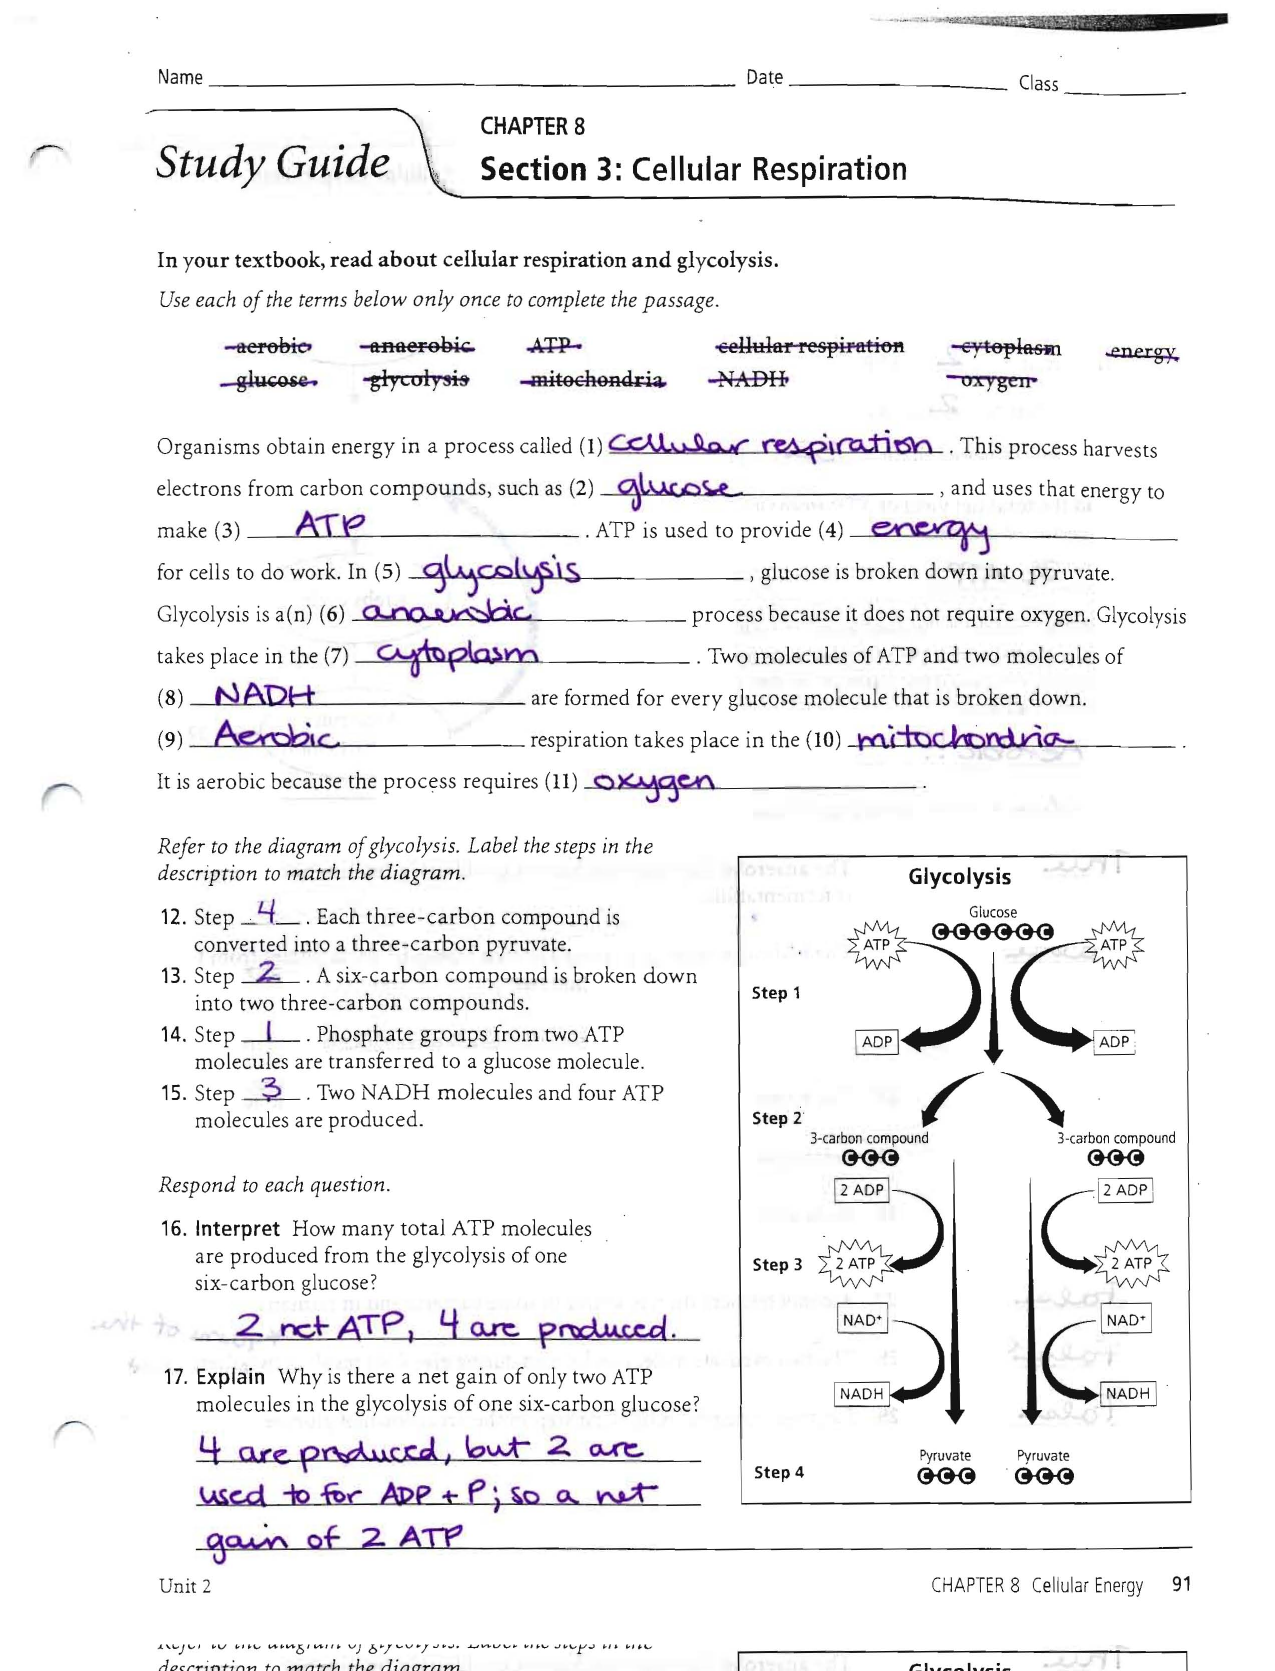 chapter-8-section-3-cellular-respiration-study-guide-answers-study-poster